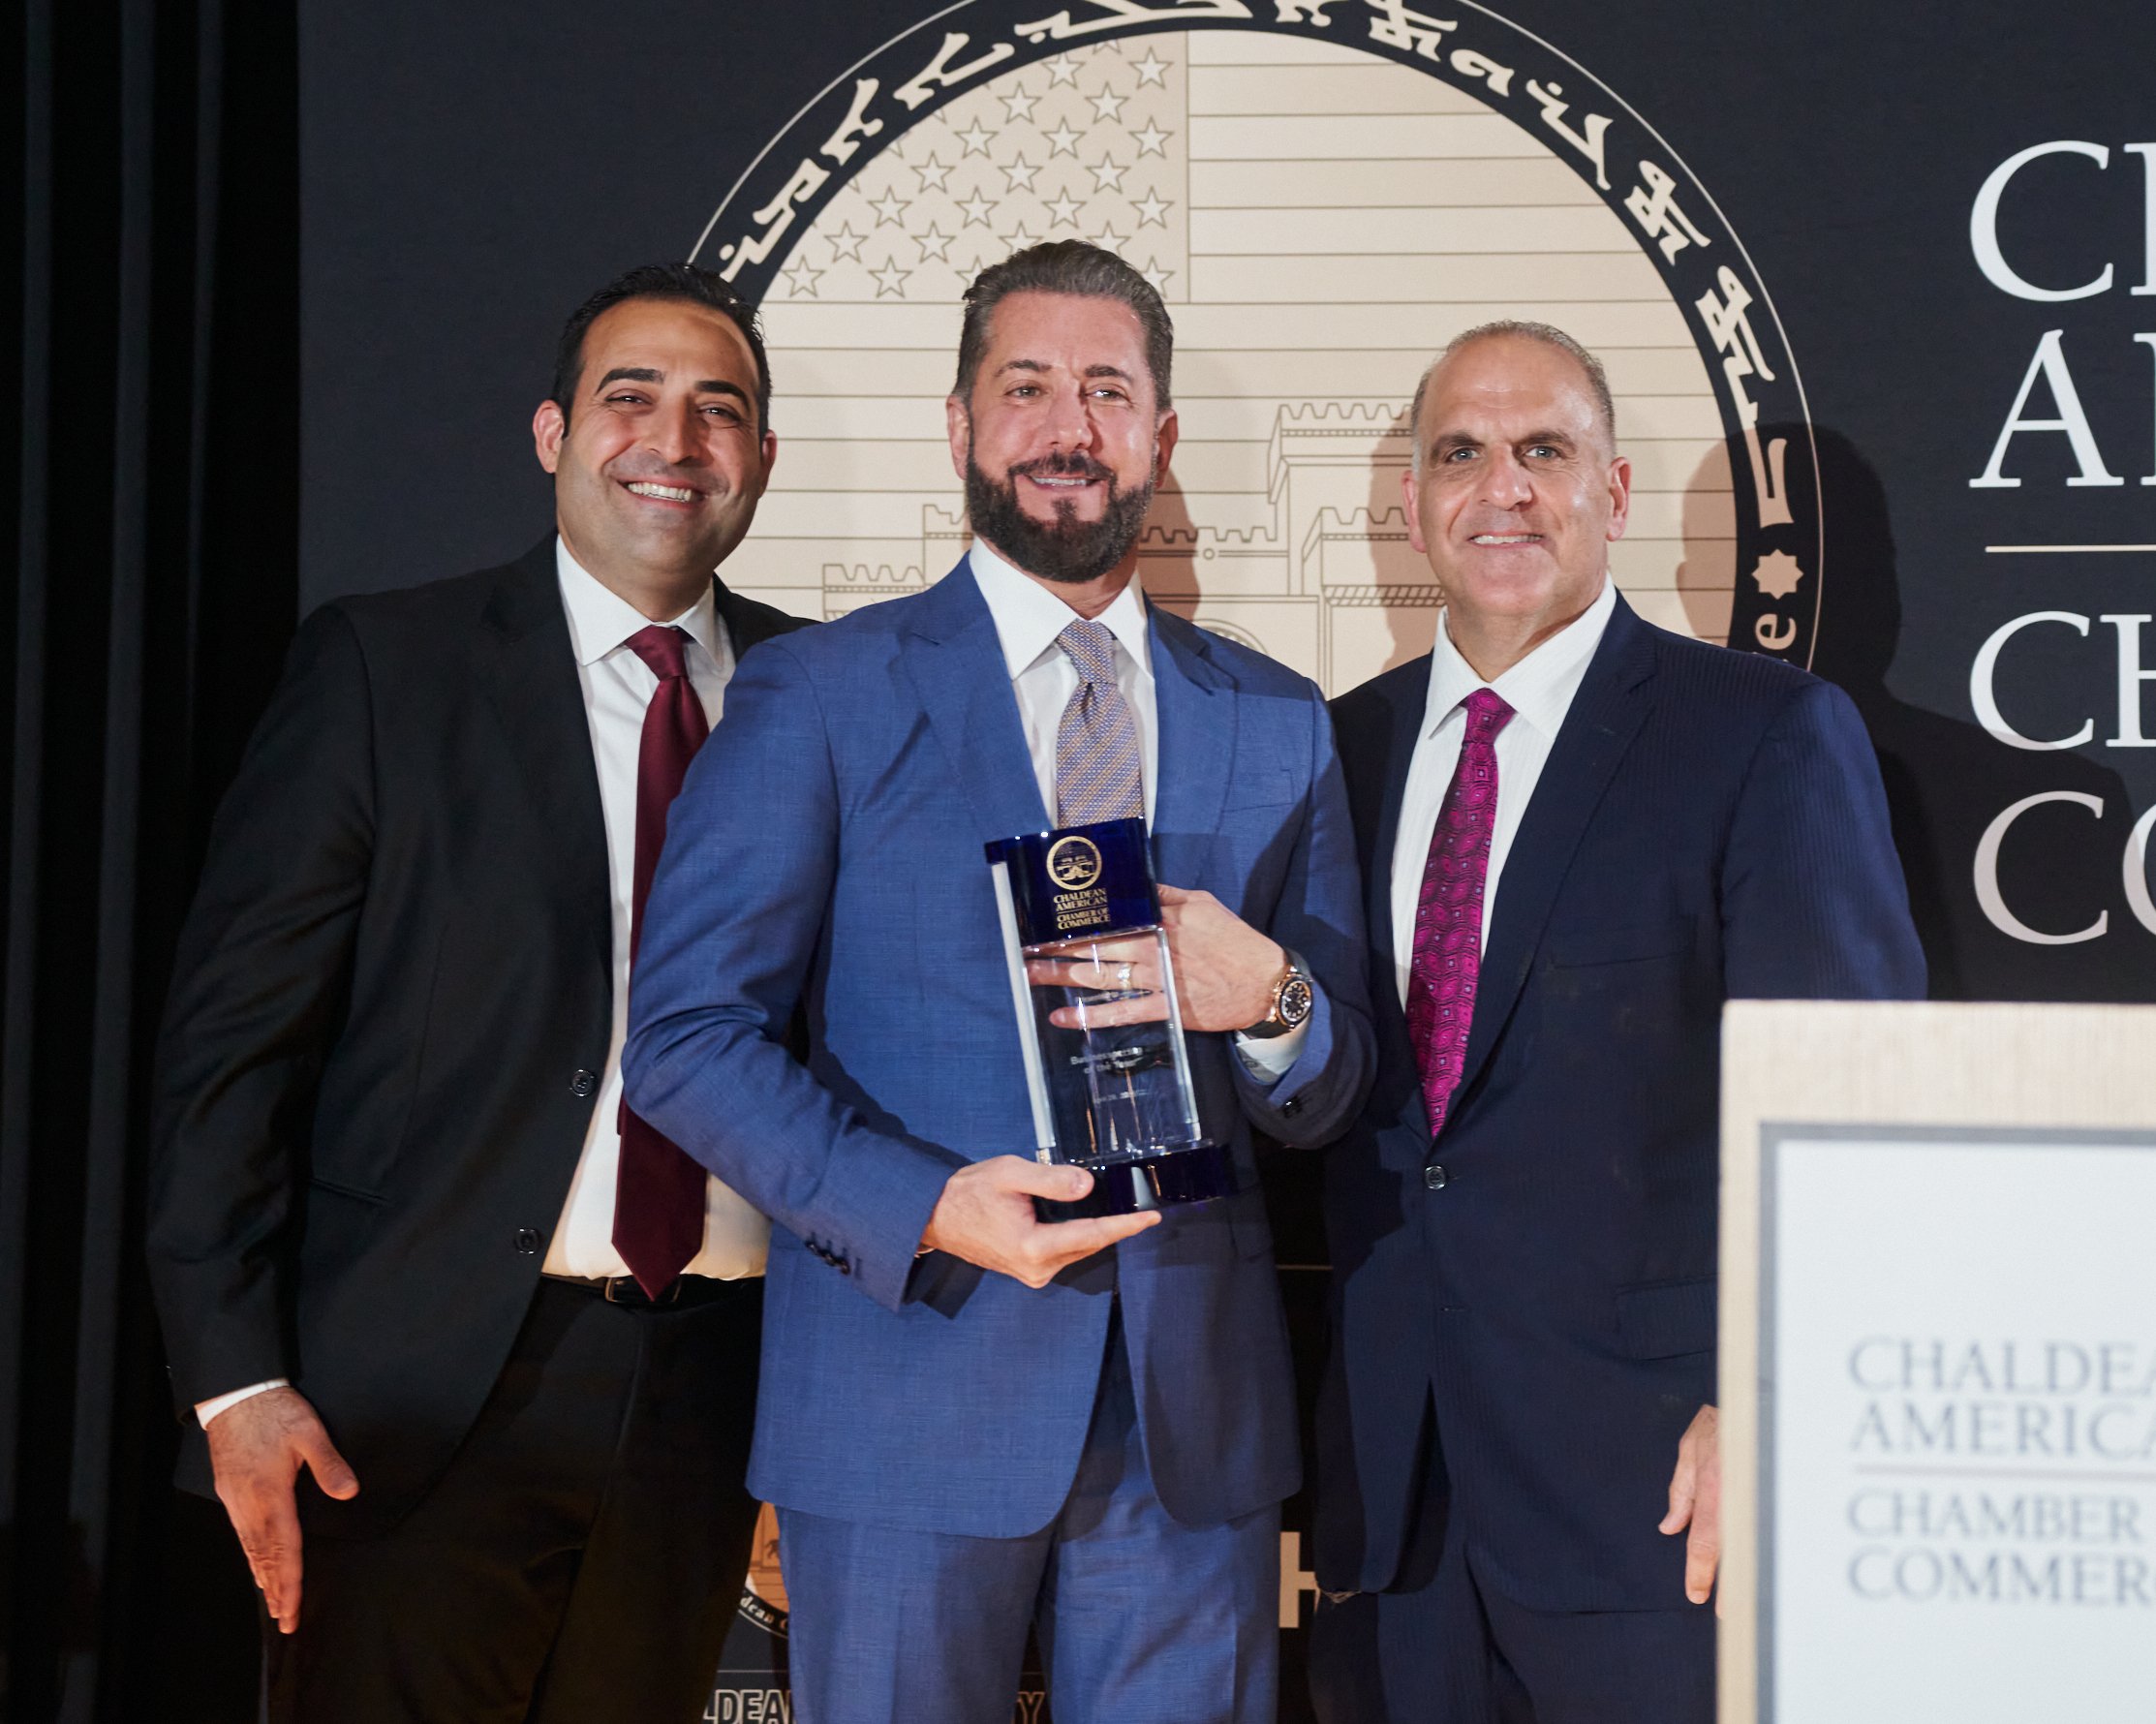  CACC’s Businessperson of the Year Ron Boji, flanked by CACC Chair Sly Sandiha (left) and Vice Chair Kevin Denha (right).  